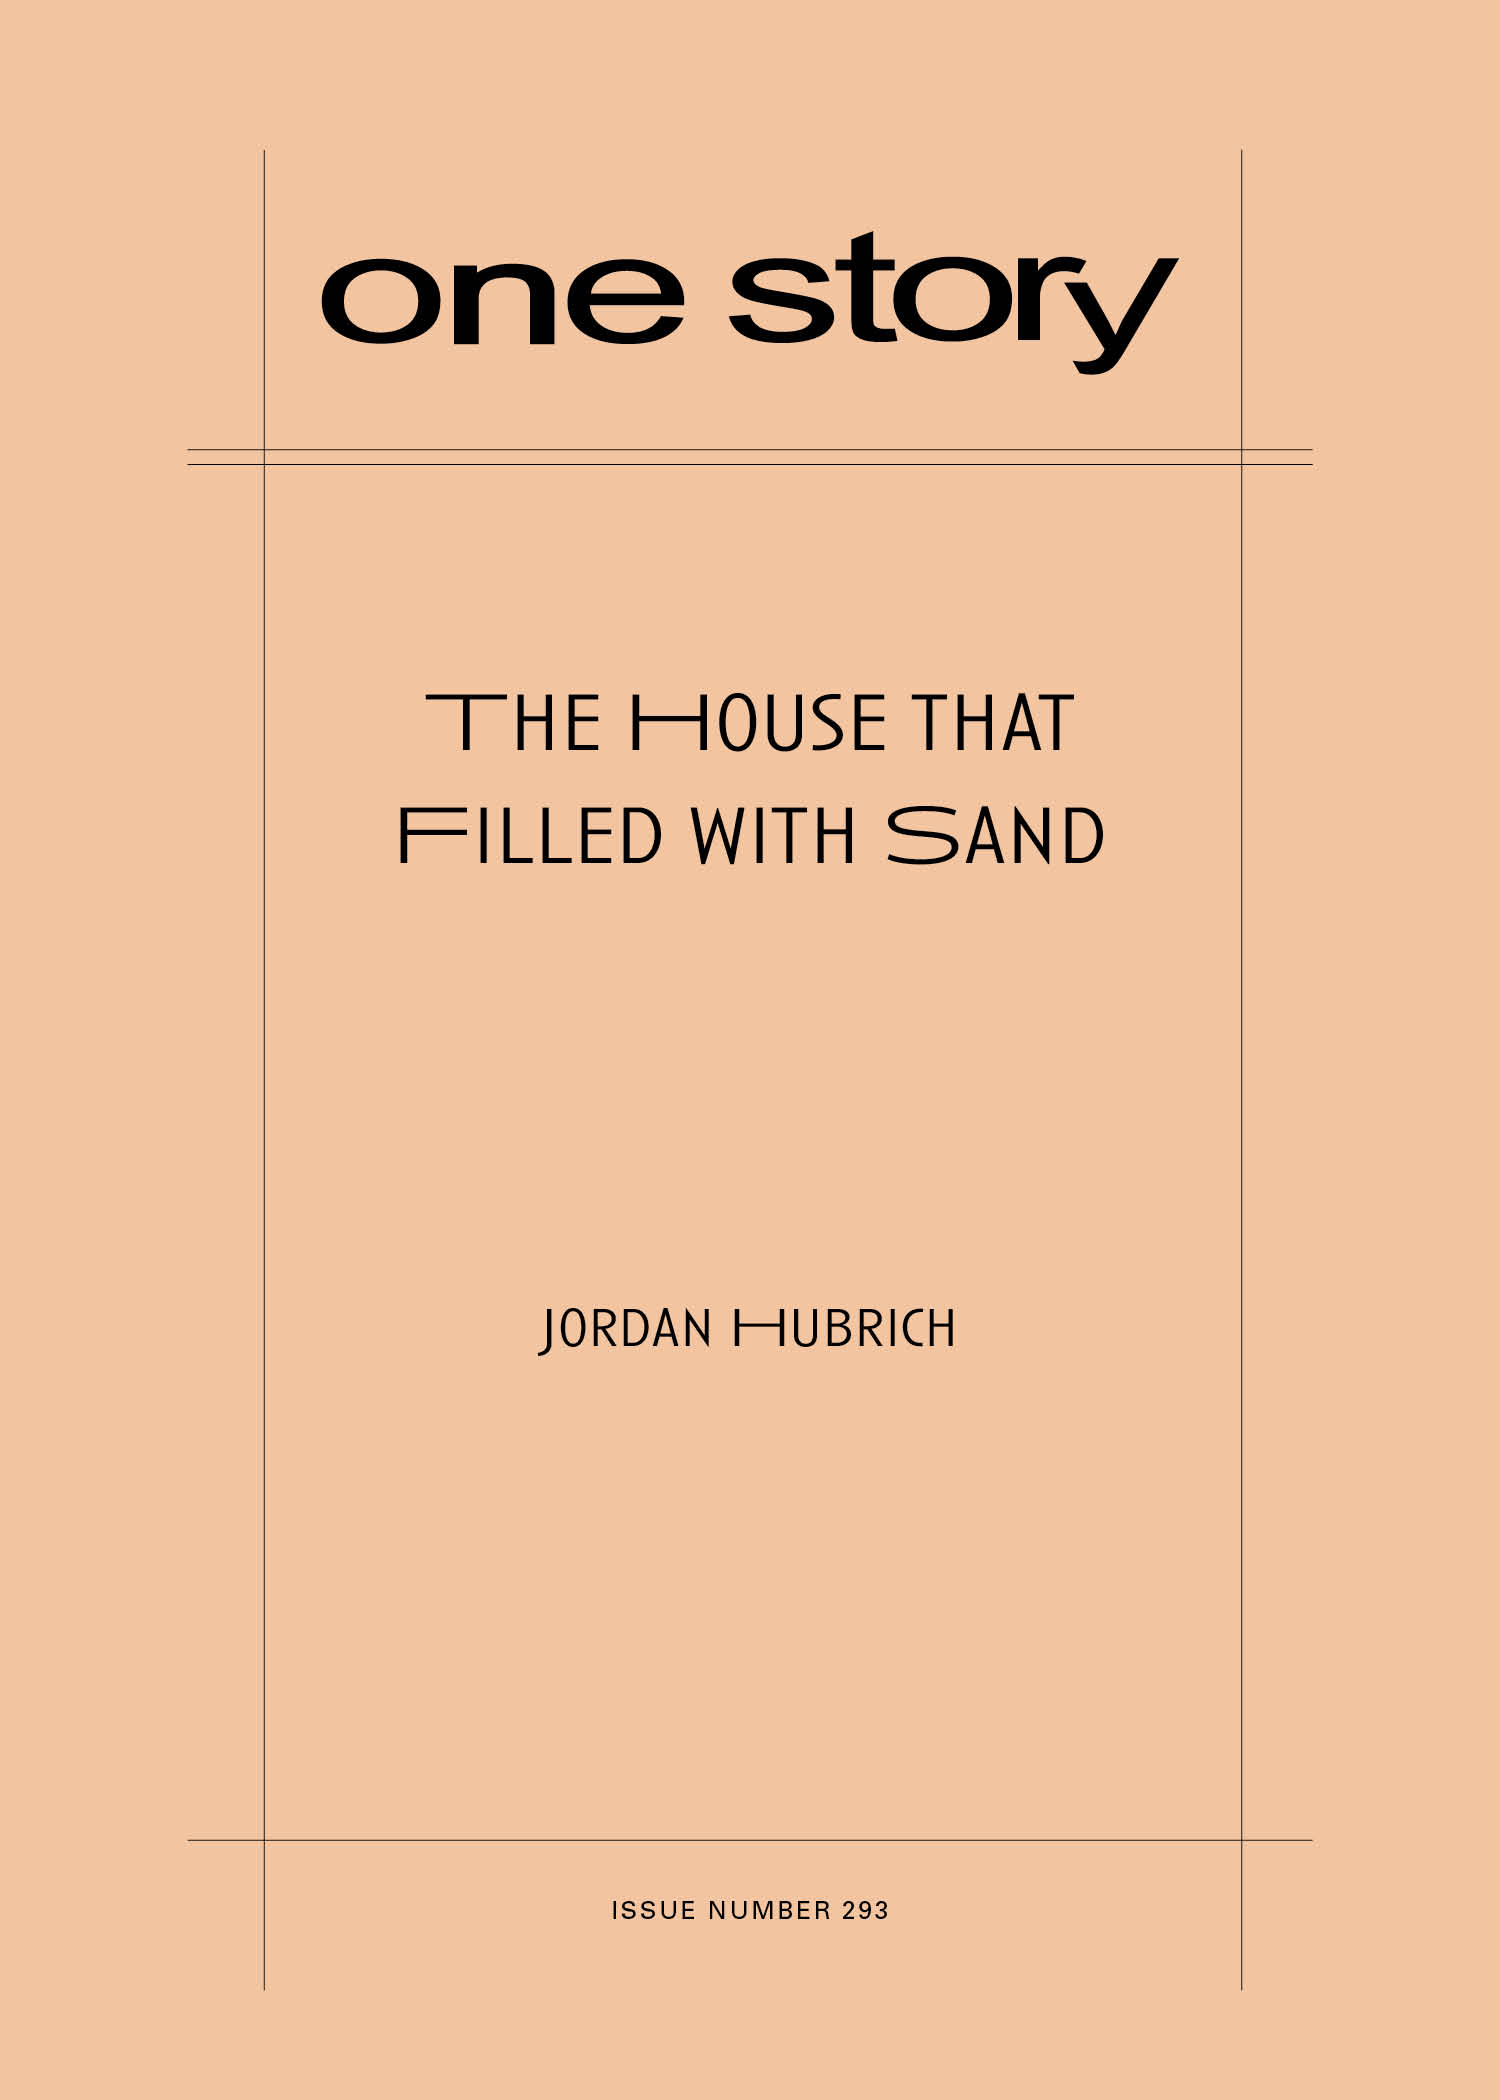 The House that Filled with Sand